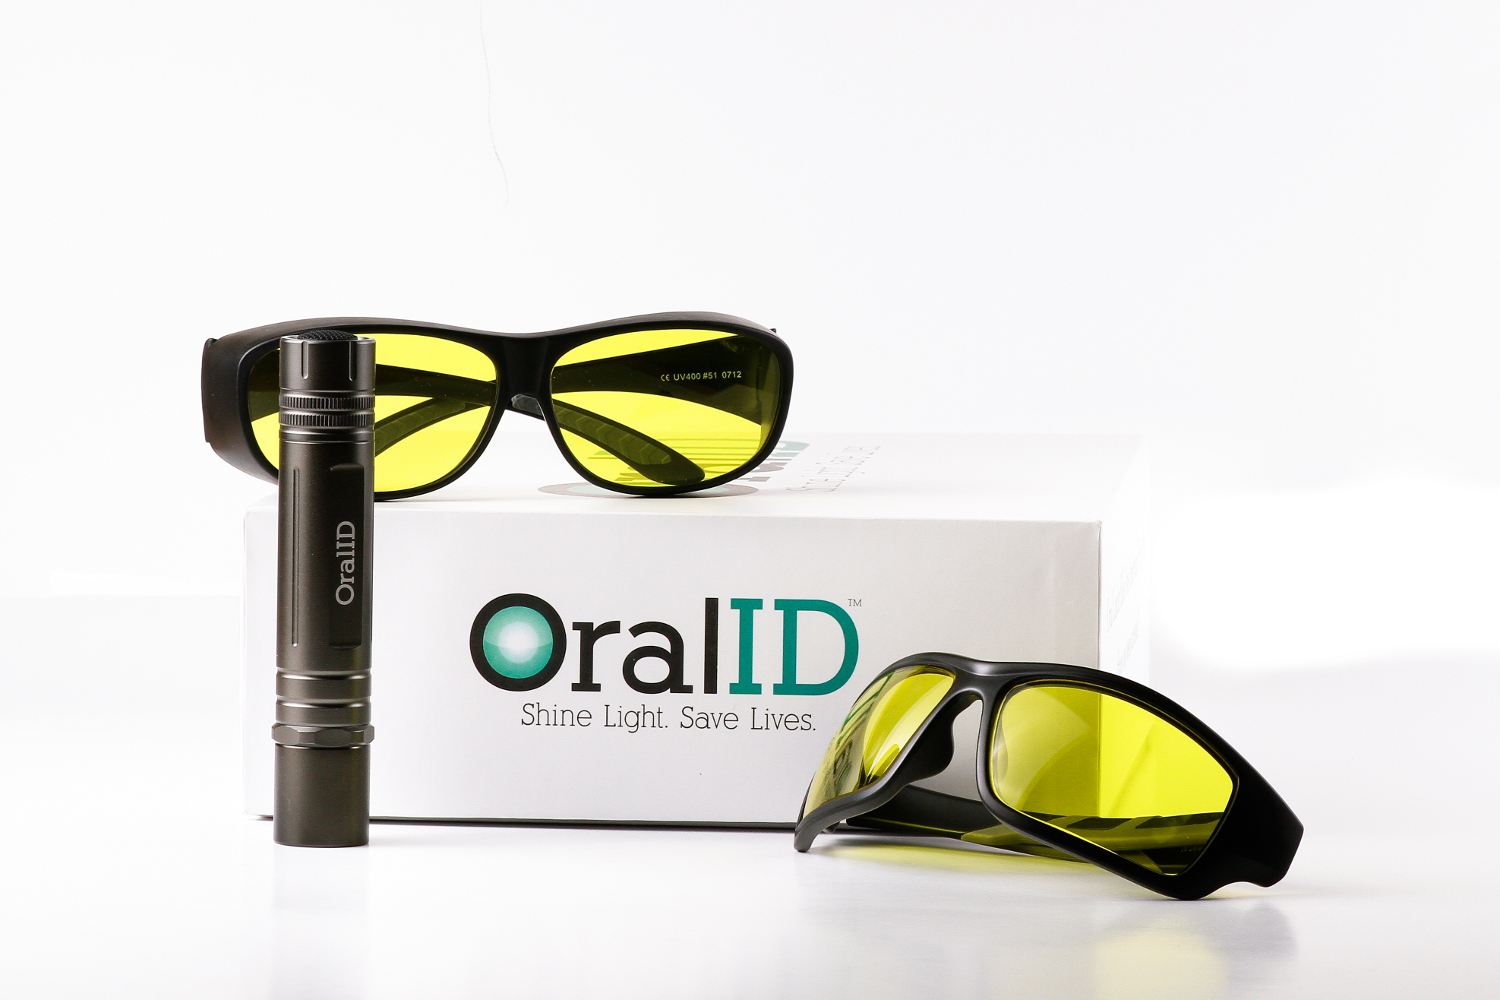 oralid product image1 1